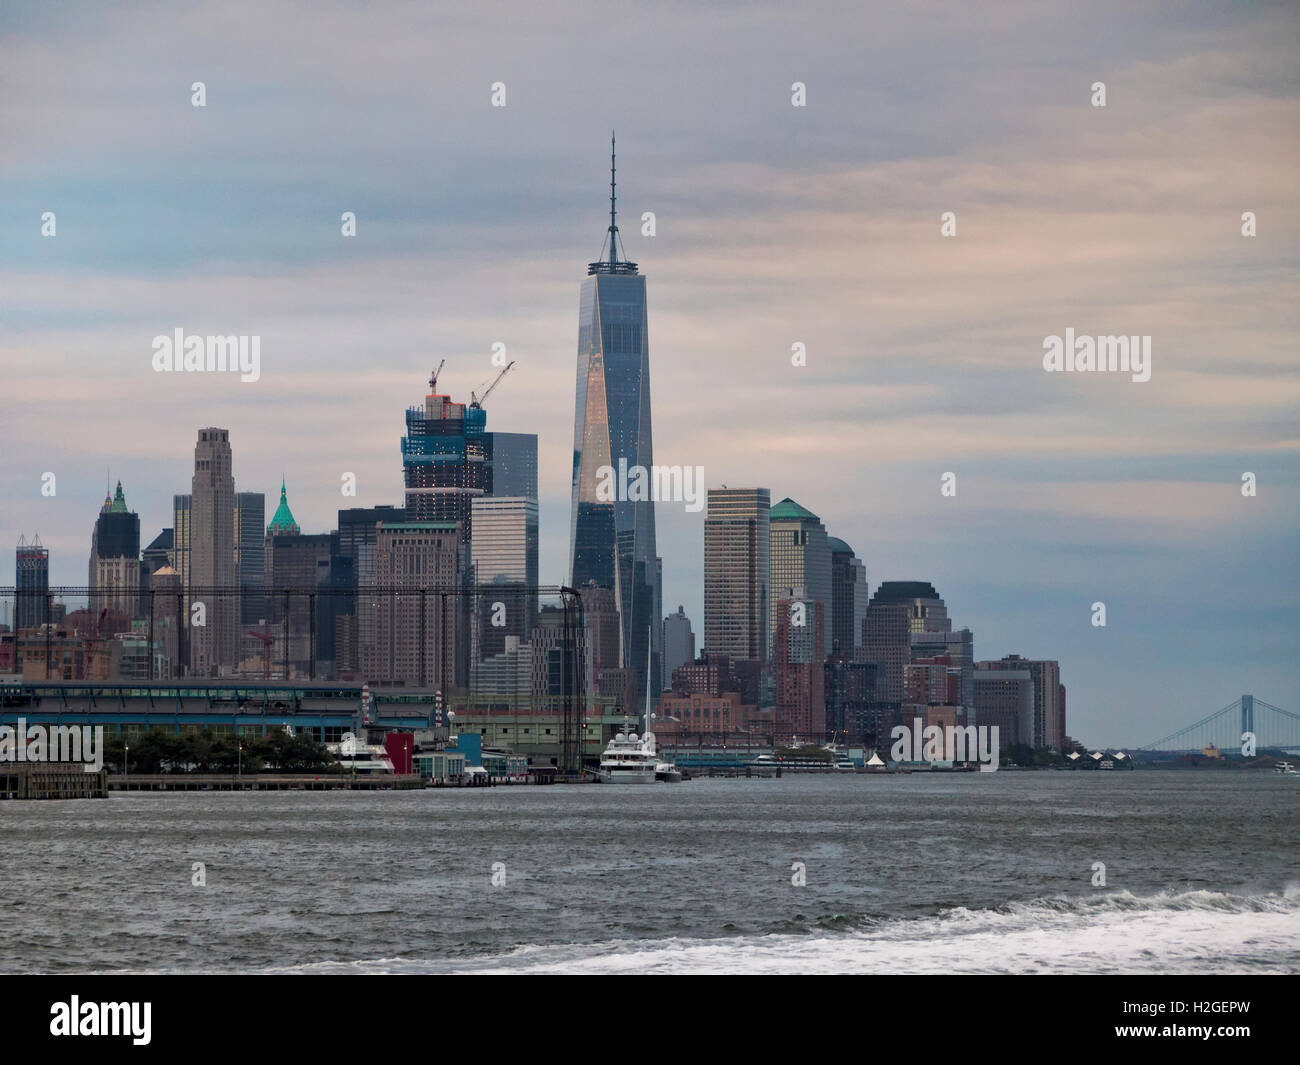 Lower Manhattan New York City skyline with the Freedom Tower, One World Trade Center, at twilight Hudson River wide angle view Stock Photo